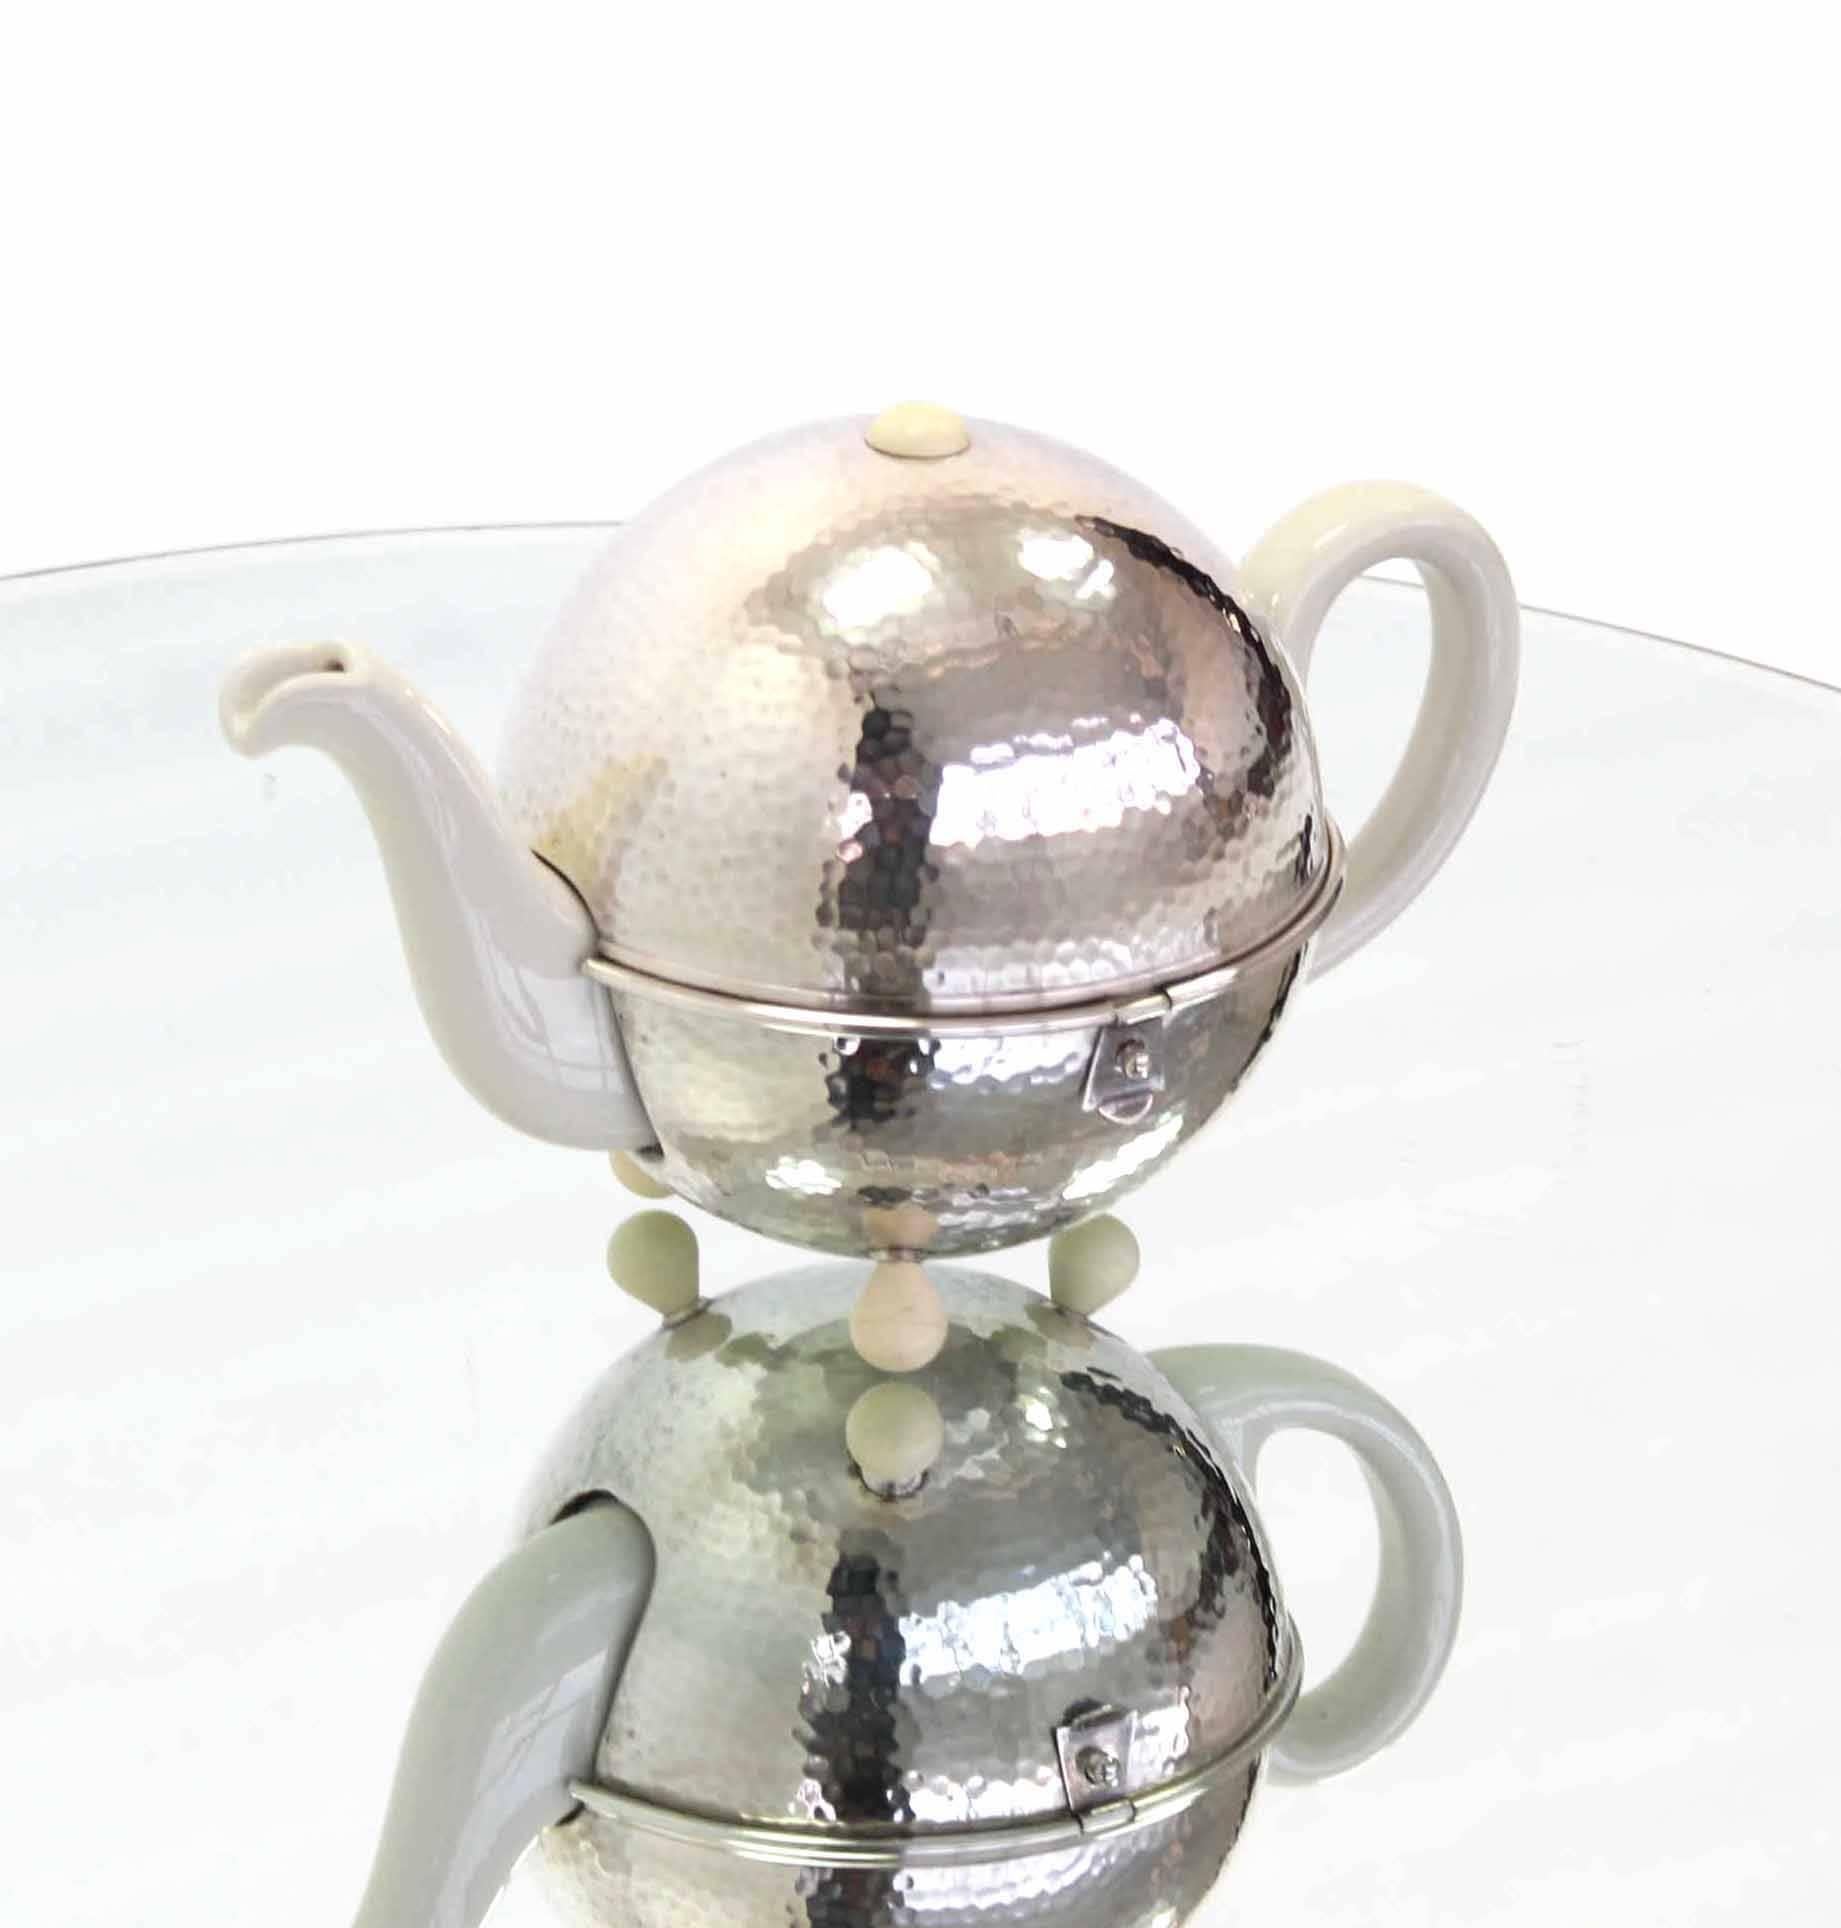 American WMF Porcelain Tea Pot in Hammered Metal Insulated Cover